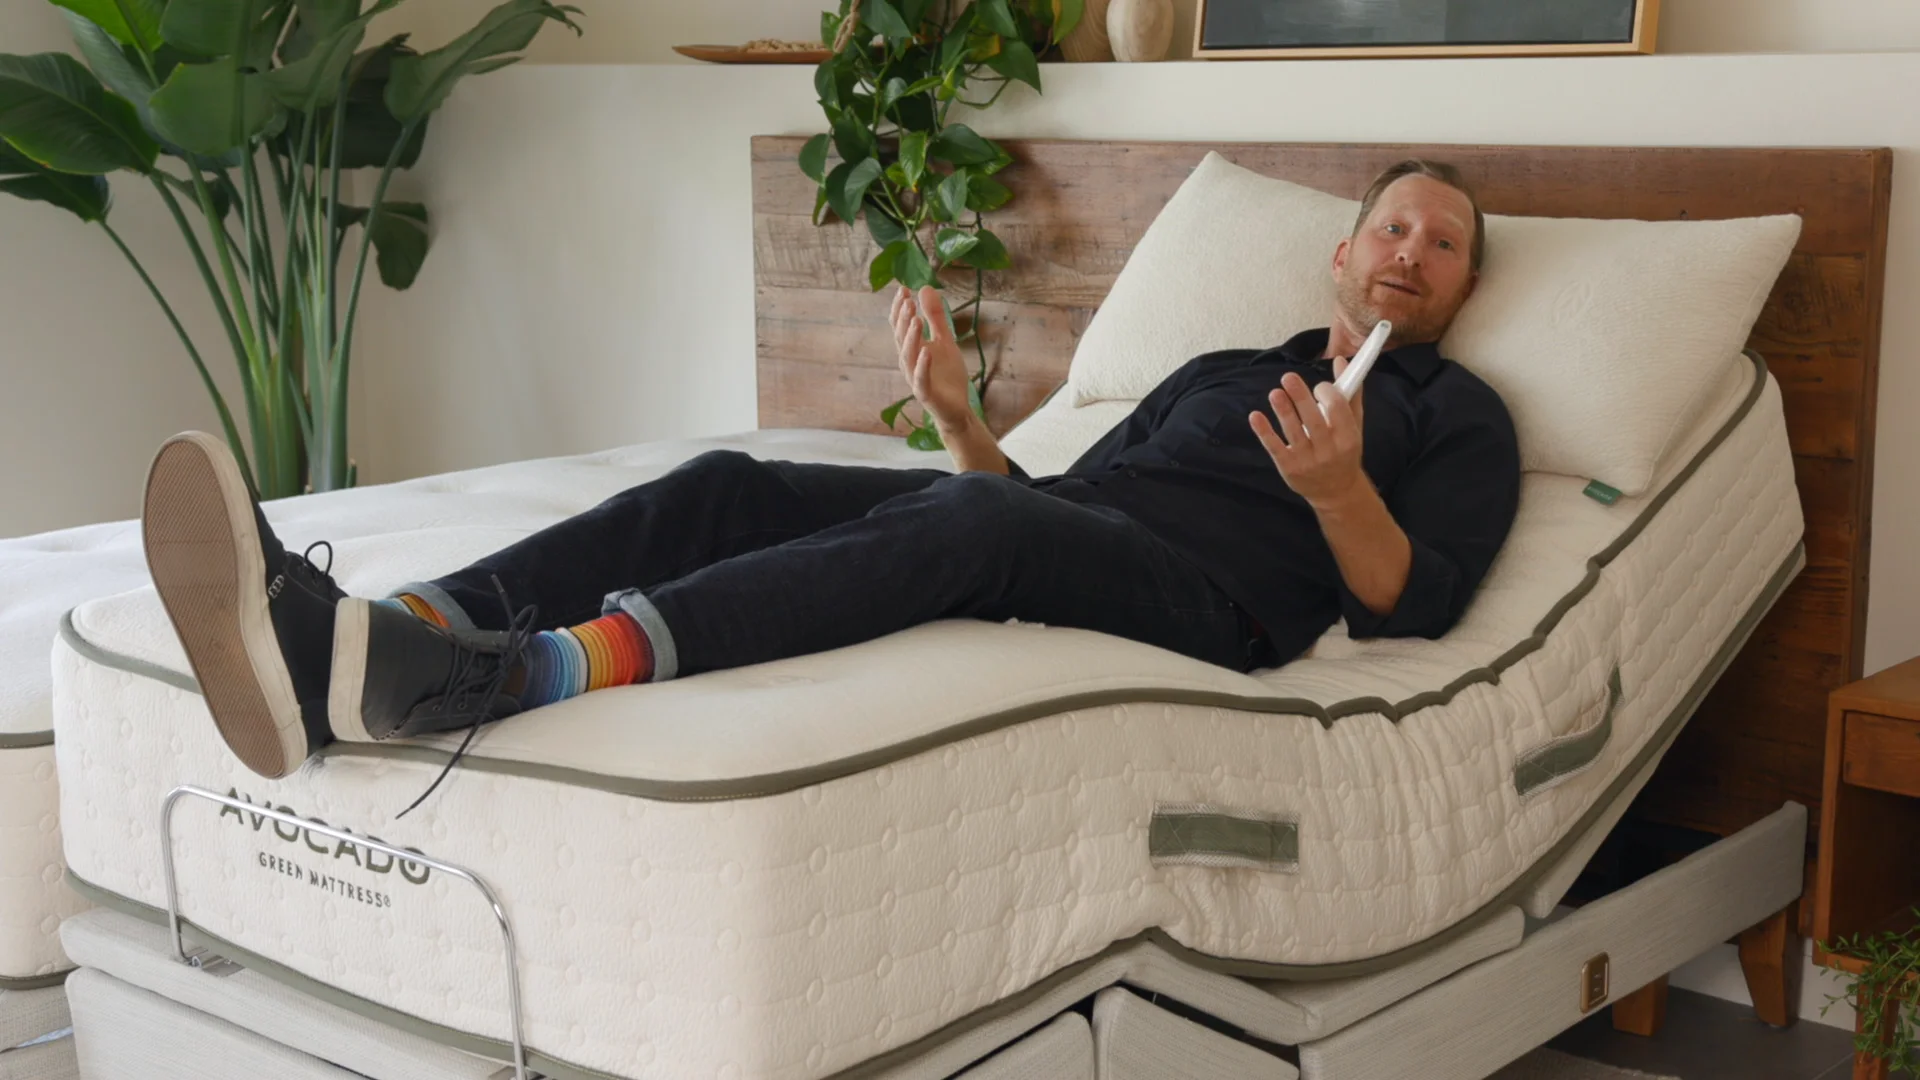 How to put Better Bedder on your Mattress on Vimeo